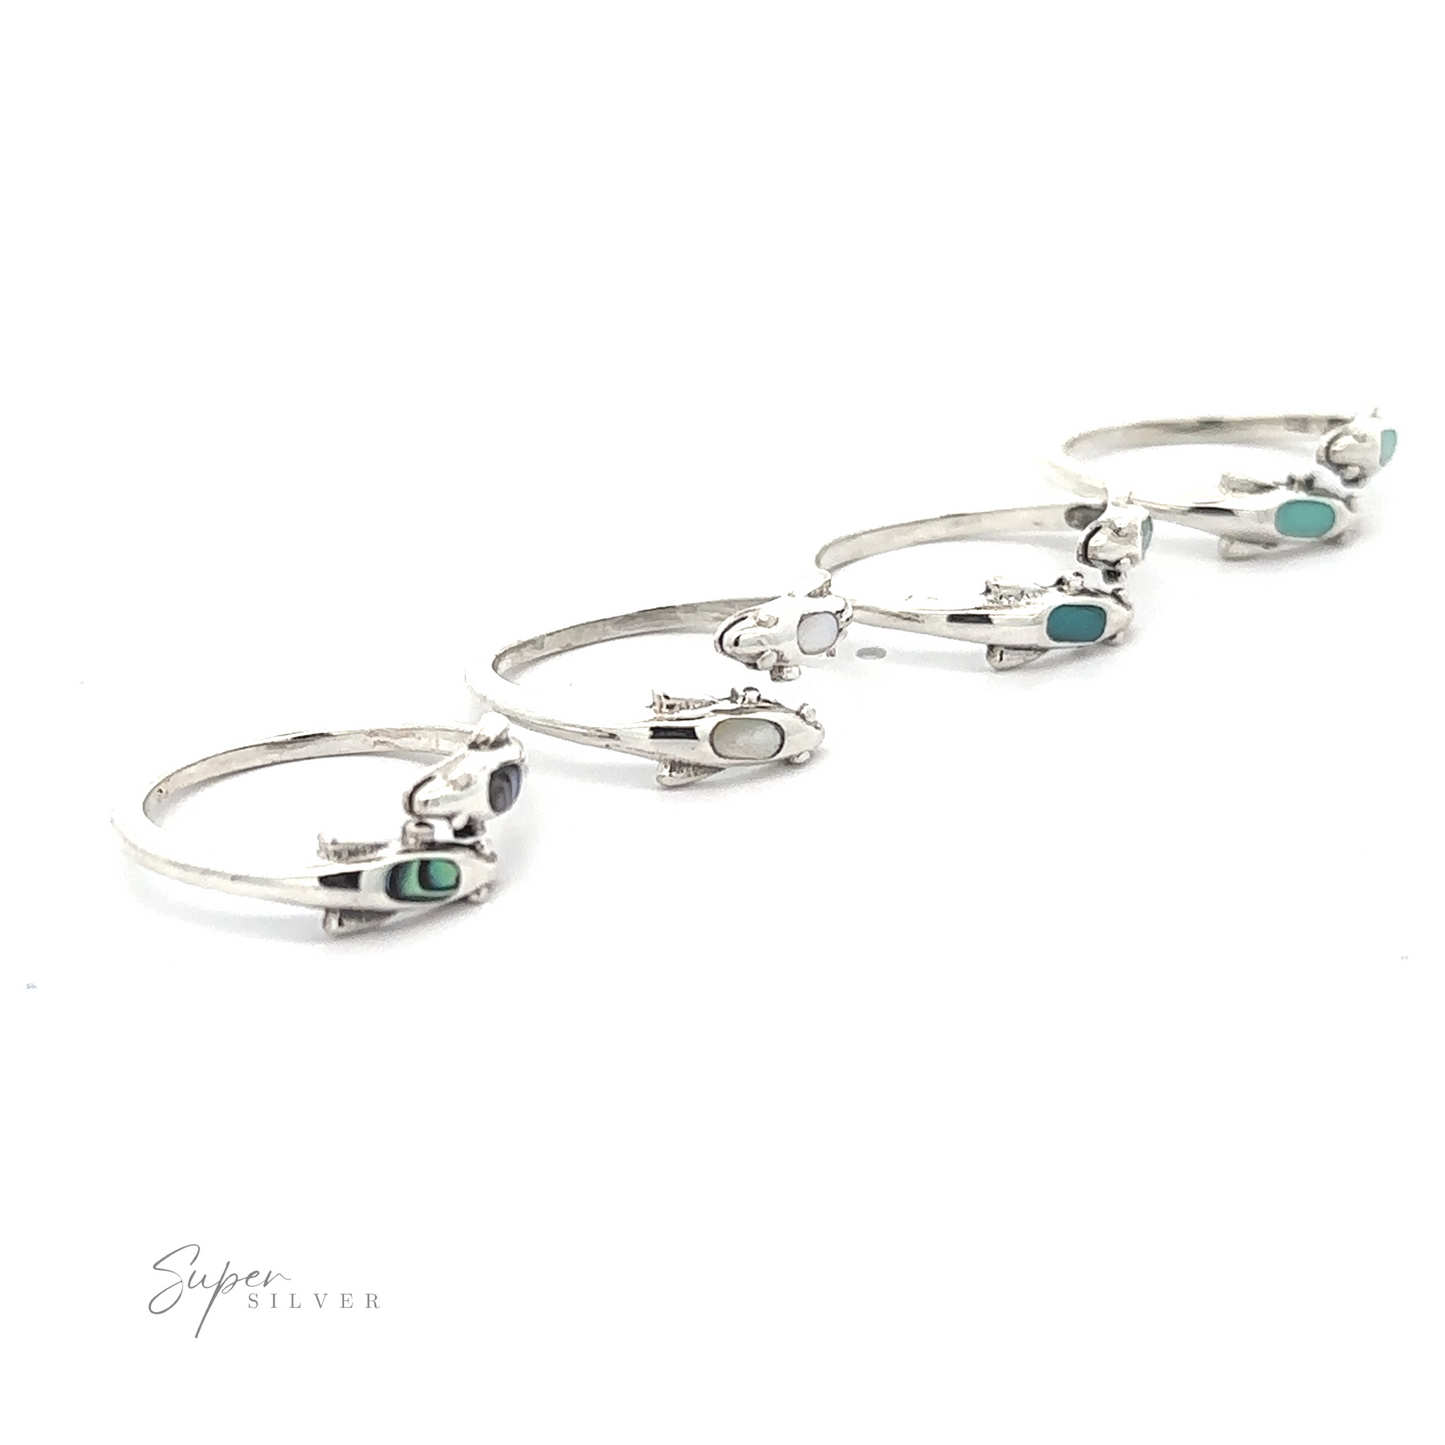 A collection of four sterling silver rings with turquoise accents, including a Dainty Inlaid Dolphin Ring, displayed on a white background.